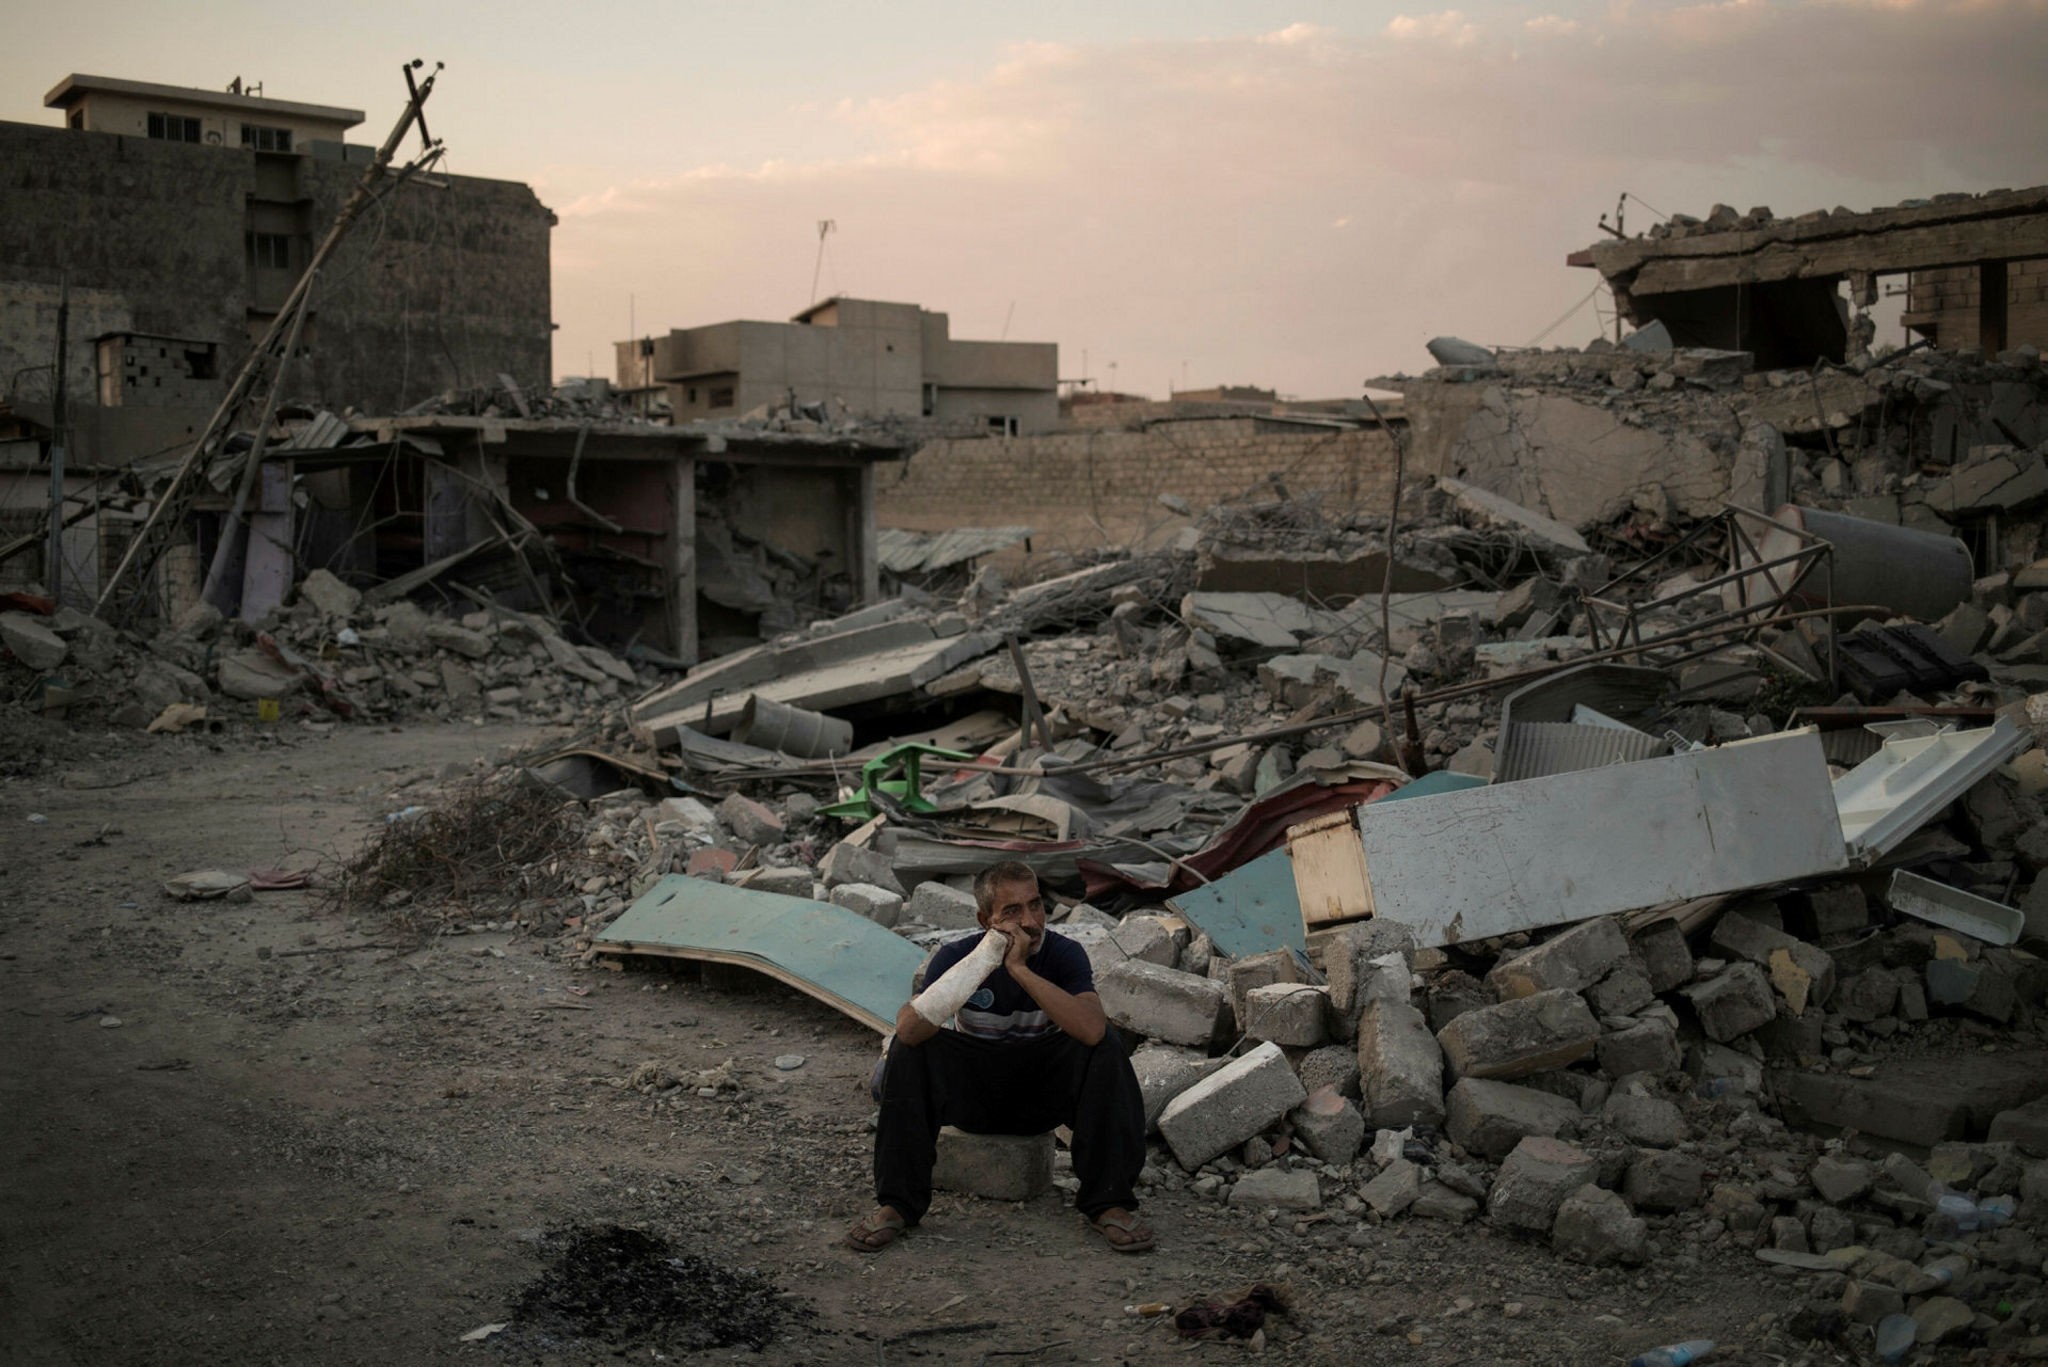 A man who was injured when his house was hit by an explosion sits on his damaged street on the west side of Mosul, July 13.